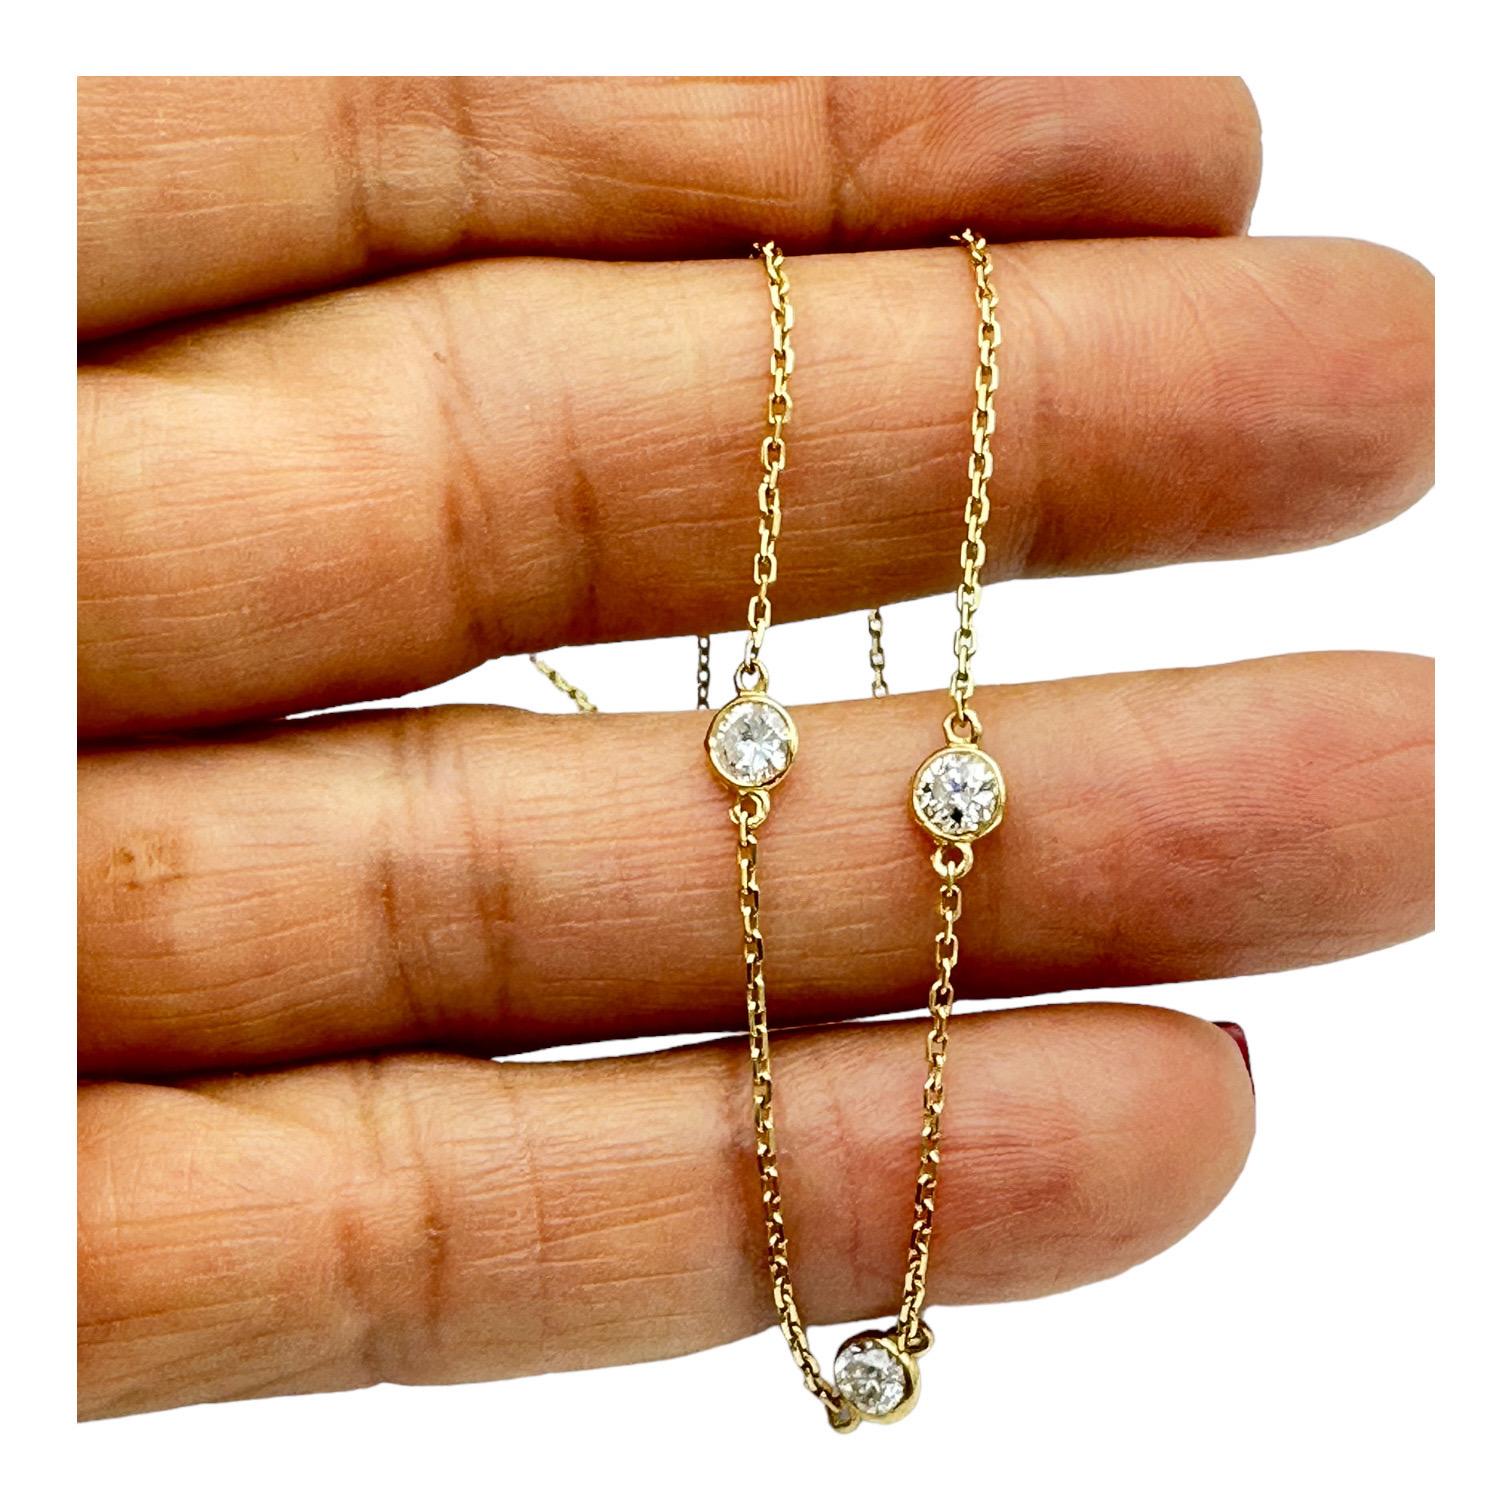 Stunning diamond cable-chain necklace consists of seven round brilliant cut diamonds. The total weight of the diamonds is 1.75 carats! Each stone is bezel set and secured while looped into this gorgeous chain necklace. 
Stunning diamond cable-chain